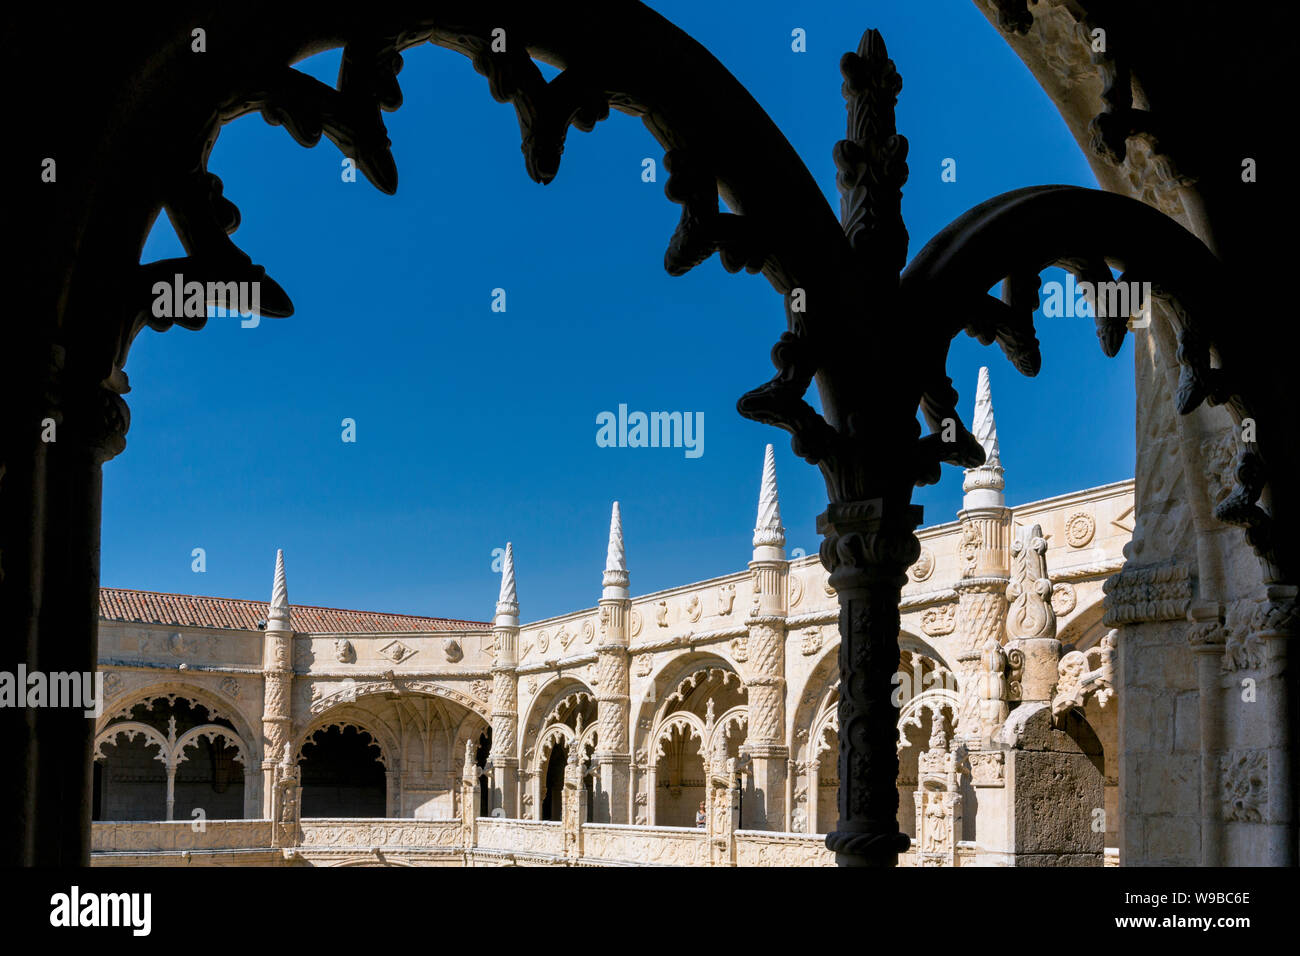 Lisbon, Portugal. The cloister of the Mosteiro dos Jeronimos, or the Monastery of the Hieronymites. The monastery is considered a triumph of Manueline Stock Photo